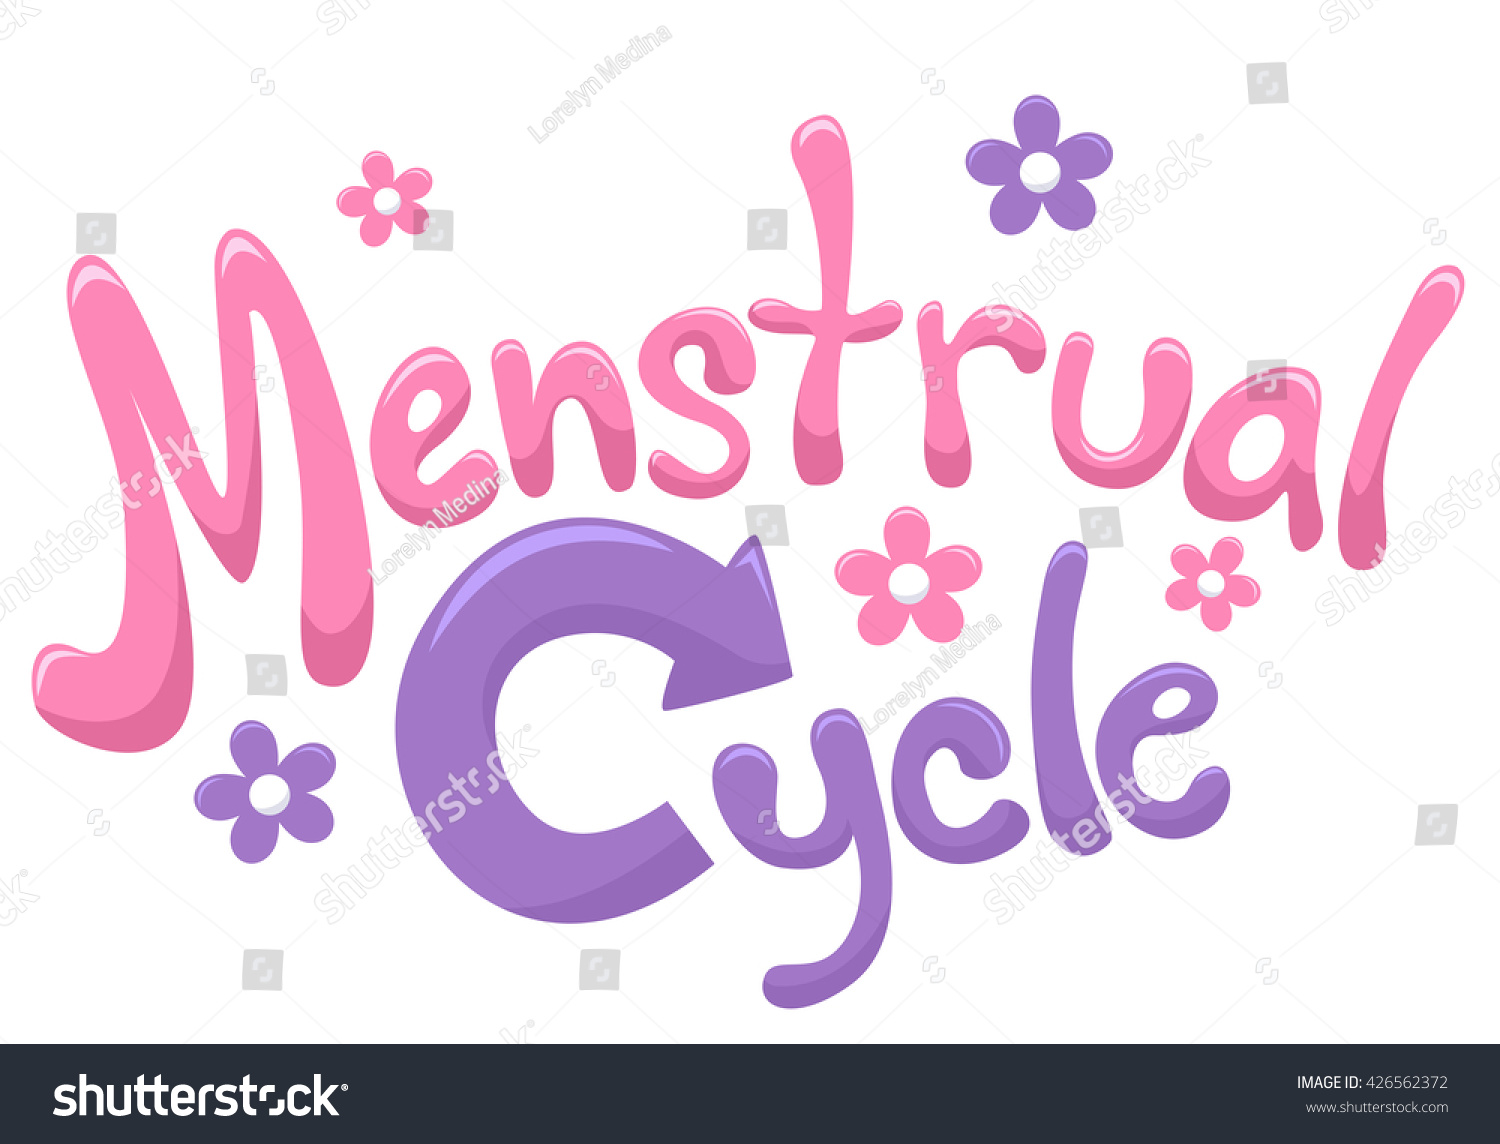 Typography Illustration Featuring Phrase Menstrual Cycle Stock Vector 426562372 Shutterstock 3847